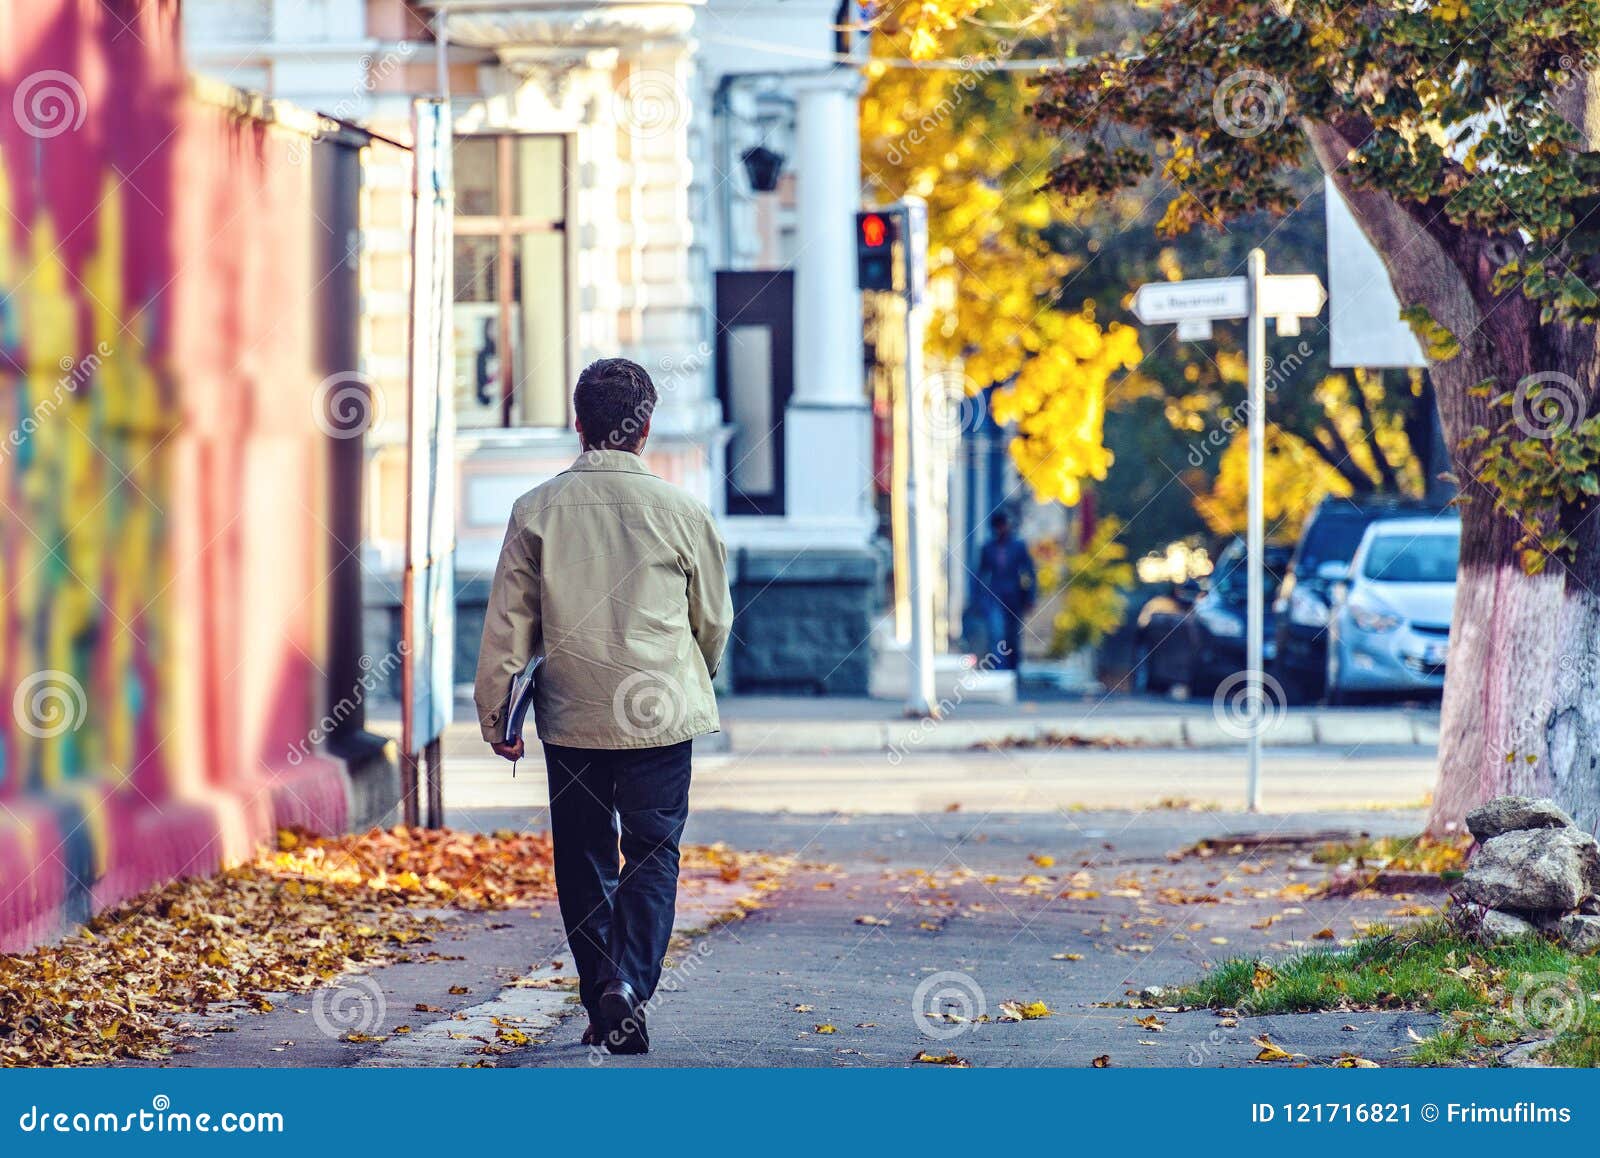 lonely man walking on sergey lazo street with map full of paper